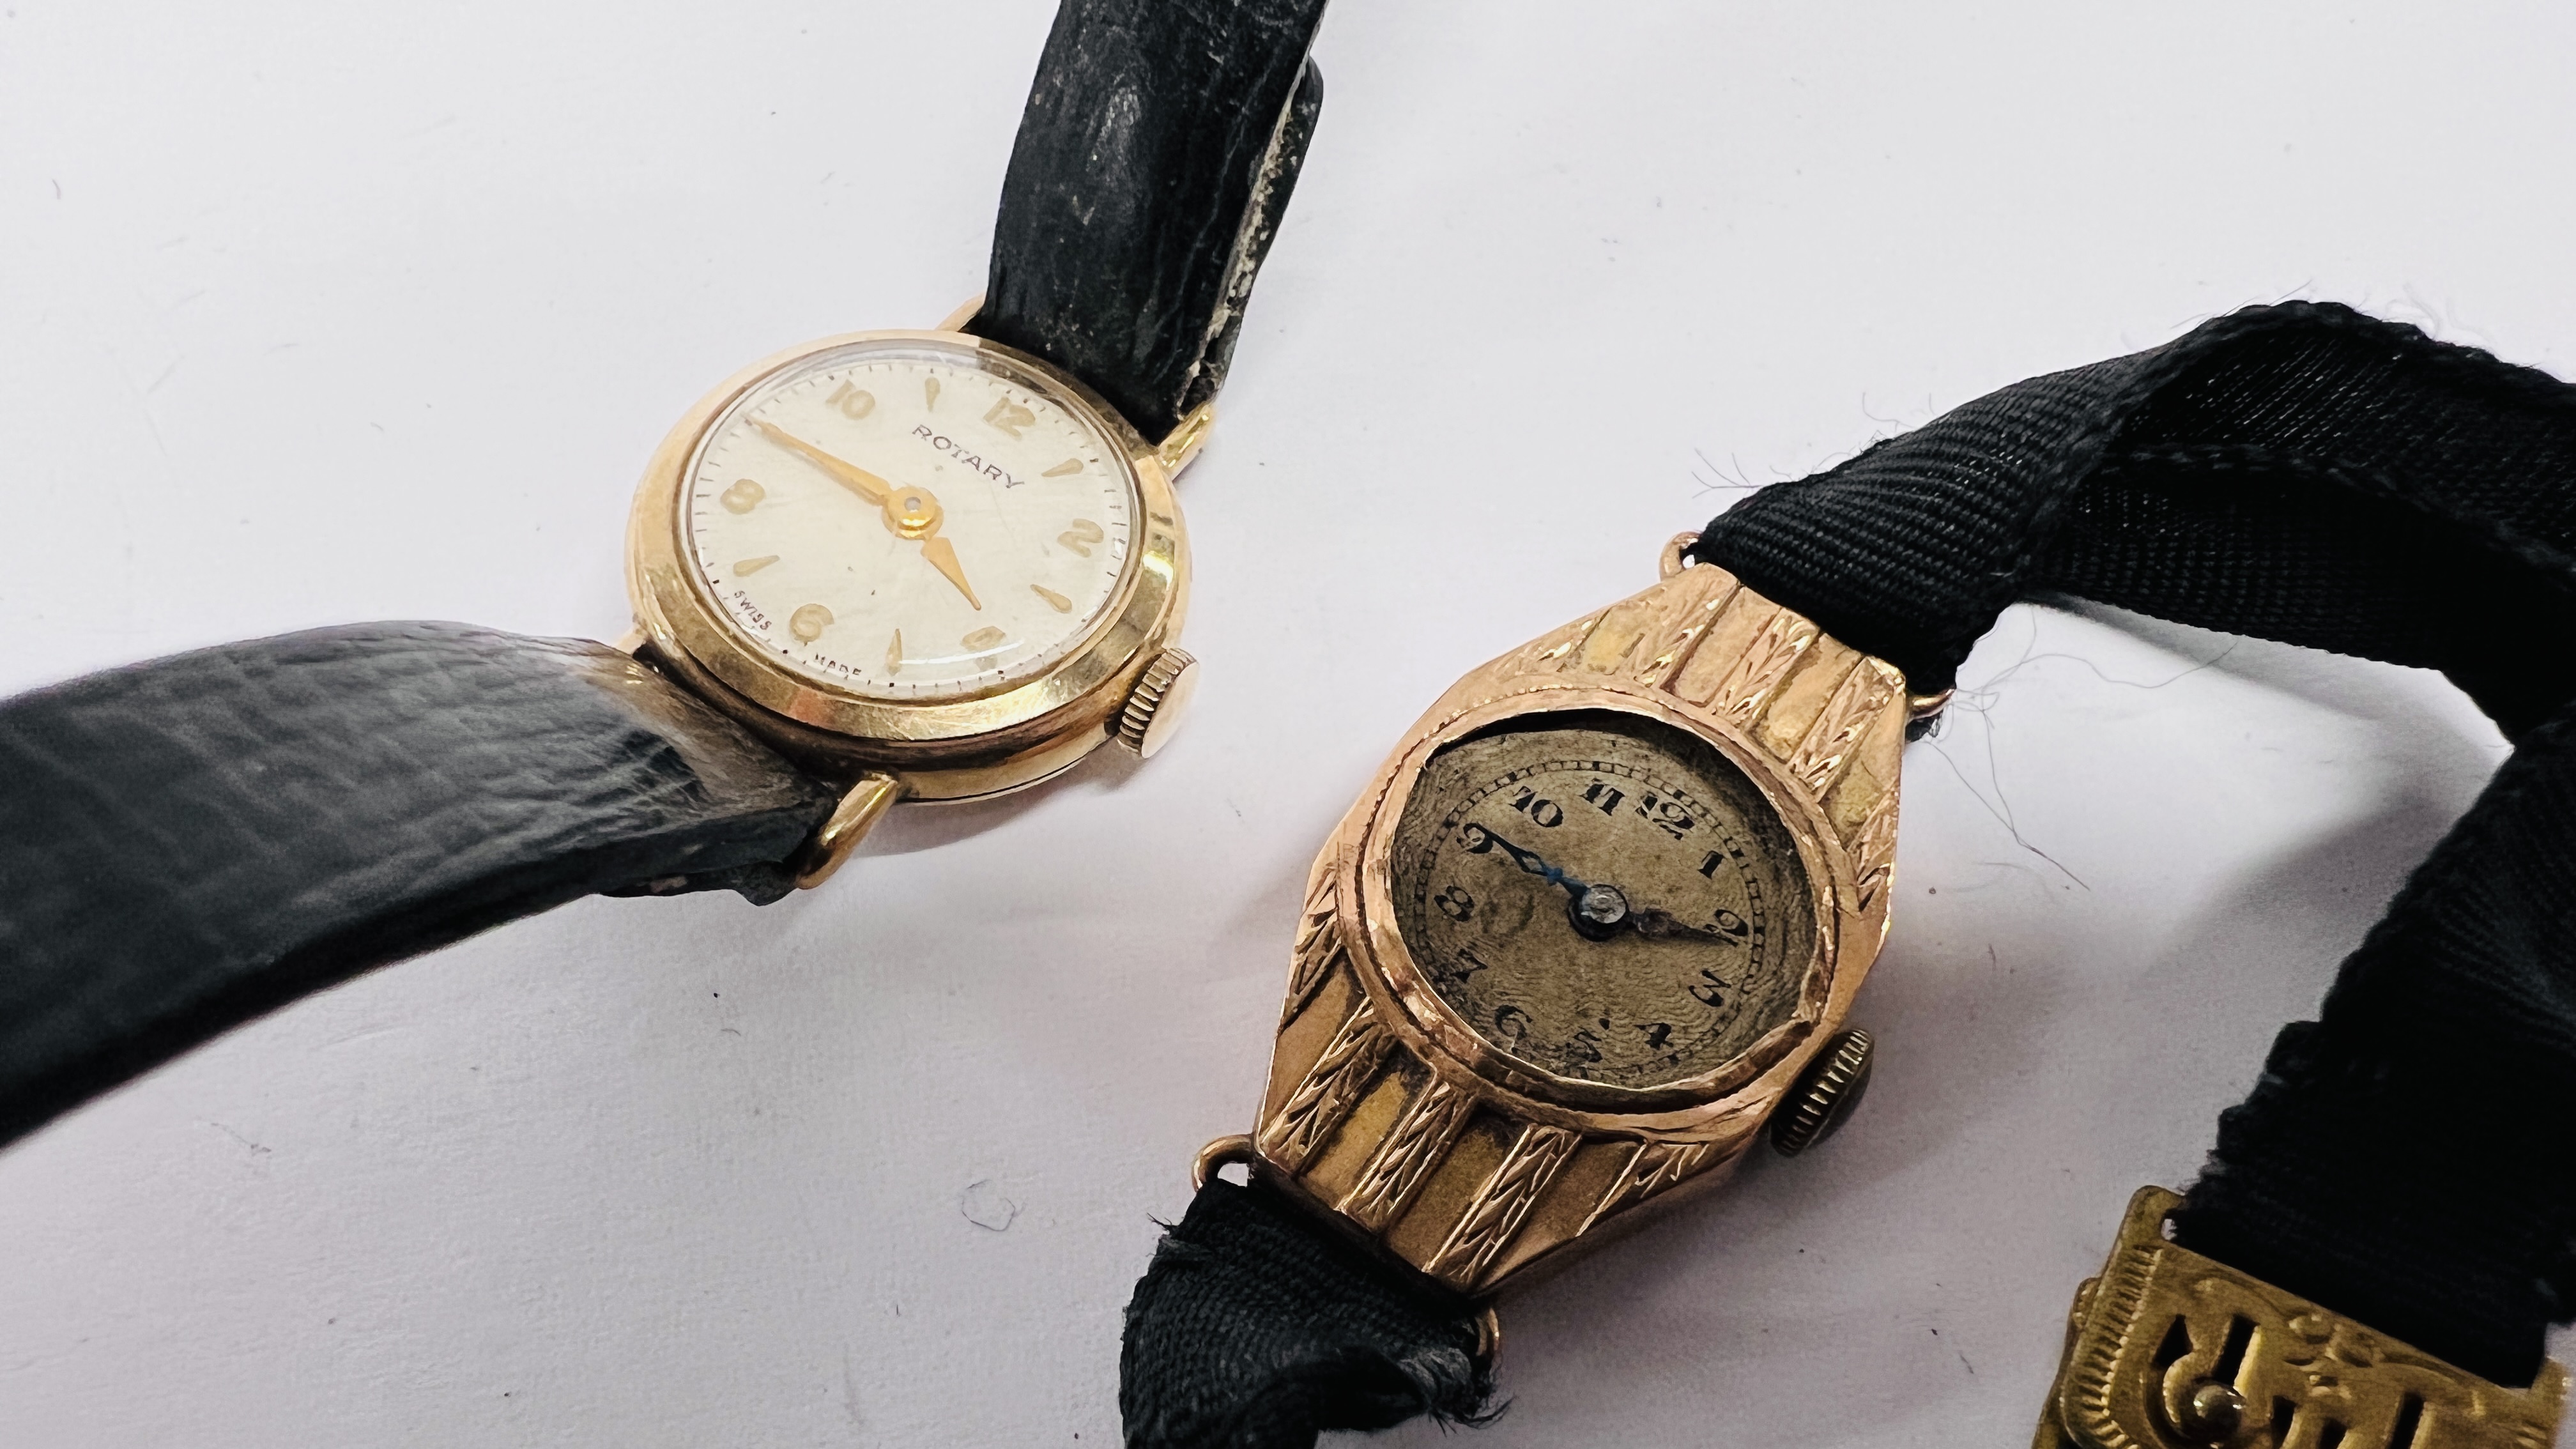 A LADY'S 9CT GOLD ROTARY WATCH WITH LEATHER STRAP AND A LADY'S 9CT GOLD COCKTAIL WATCH (POOR